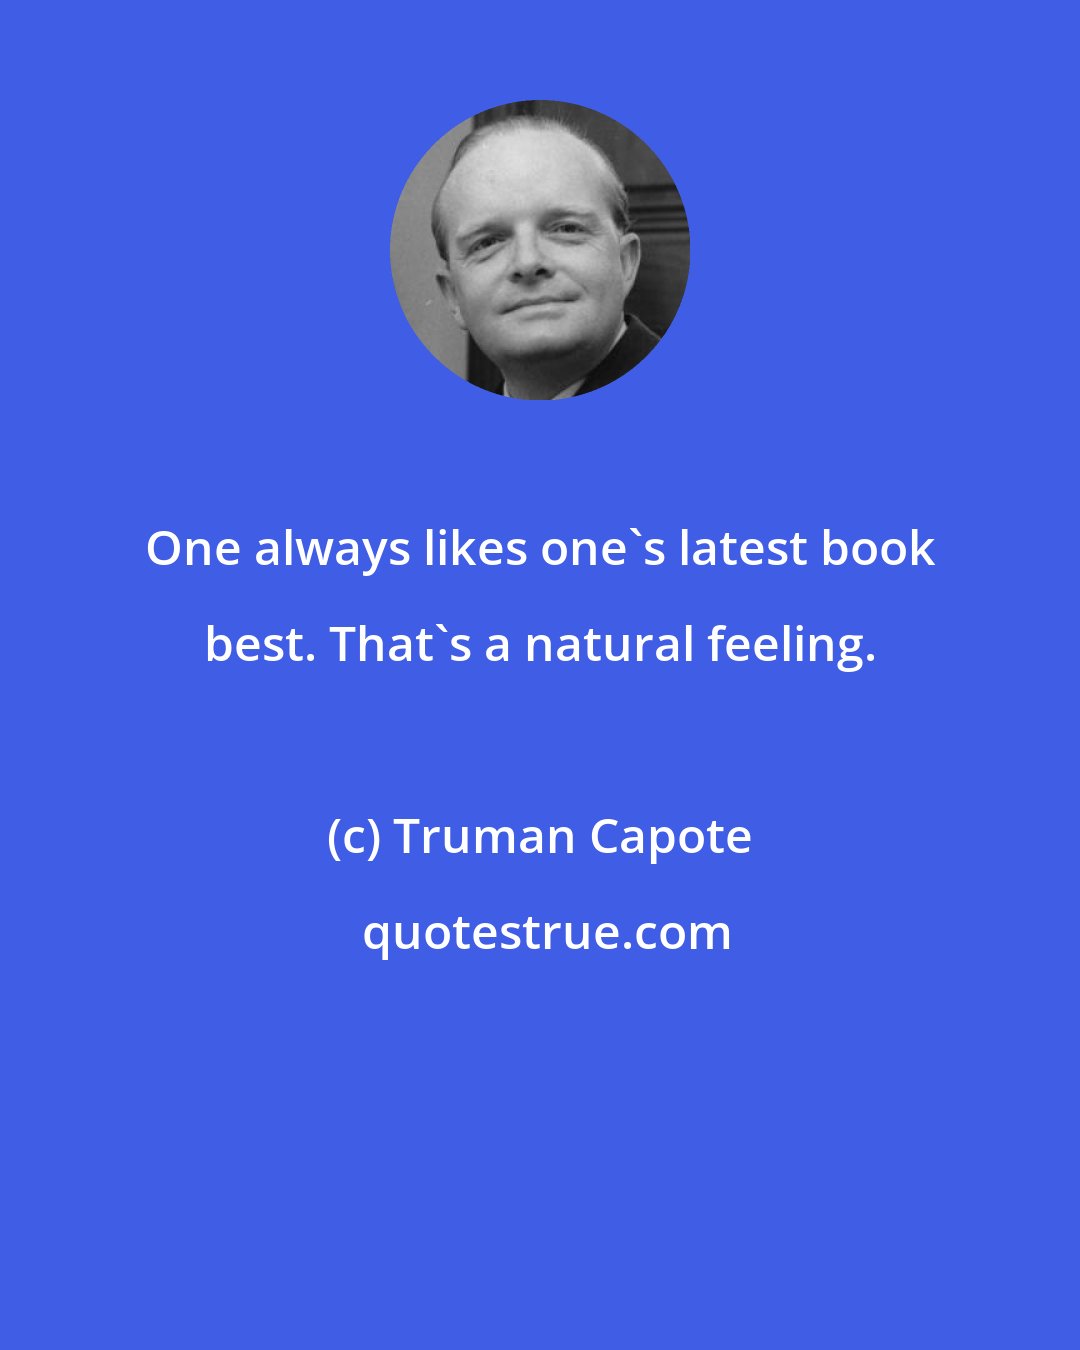 Truman Capote: One always likes one's latest book best. That's a natural feeling.